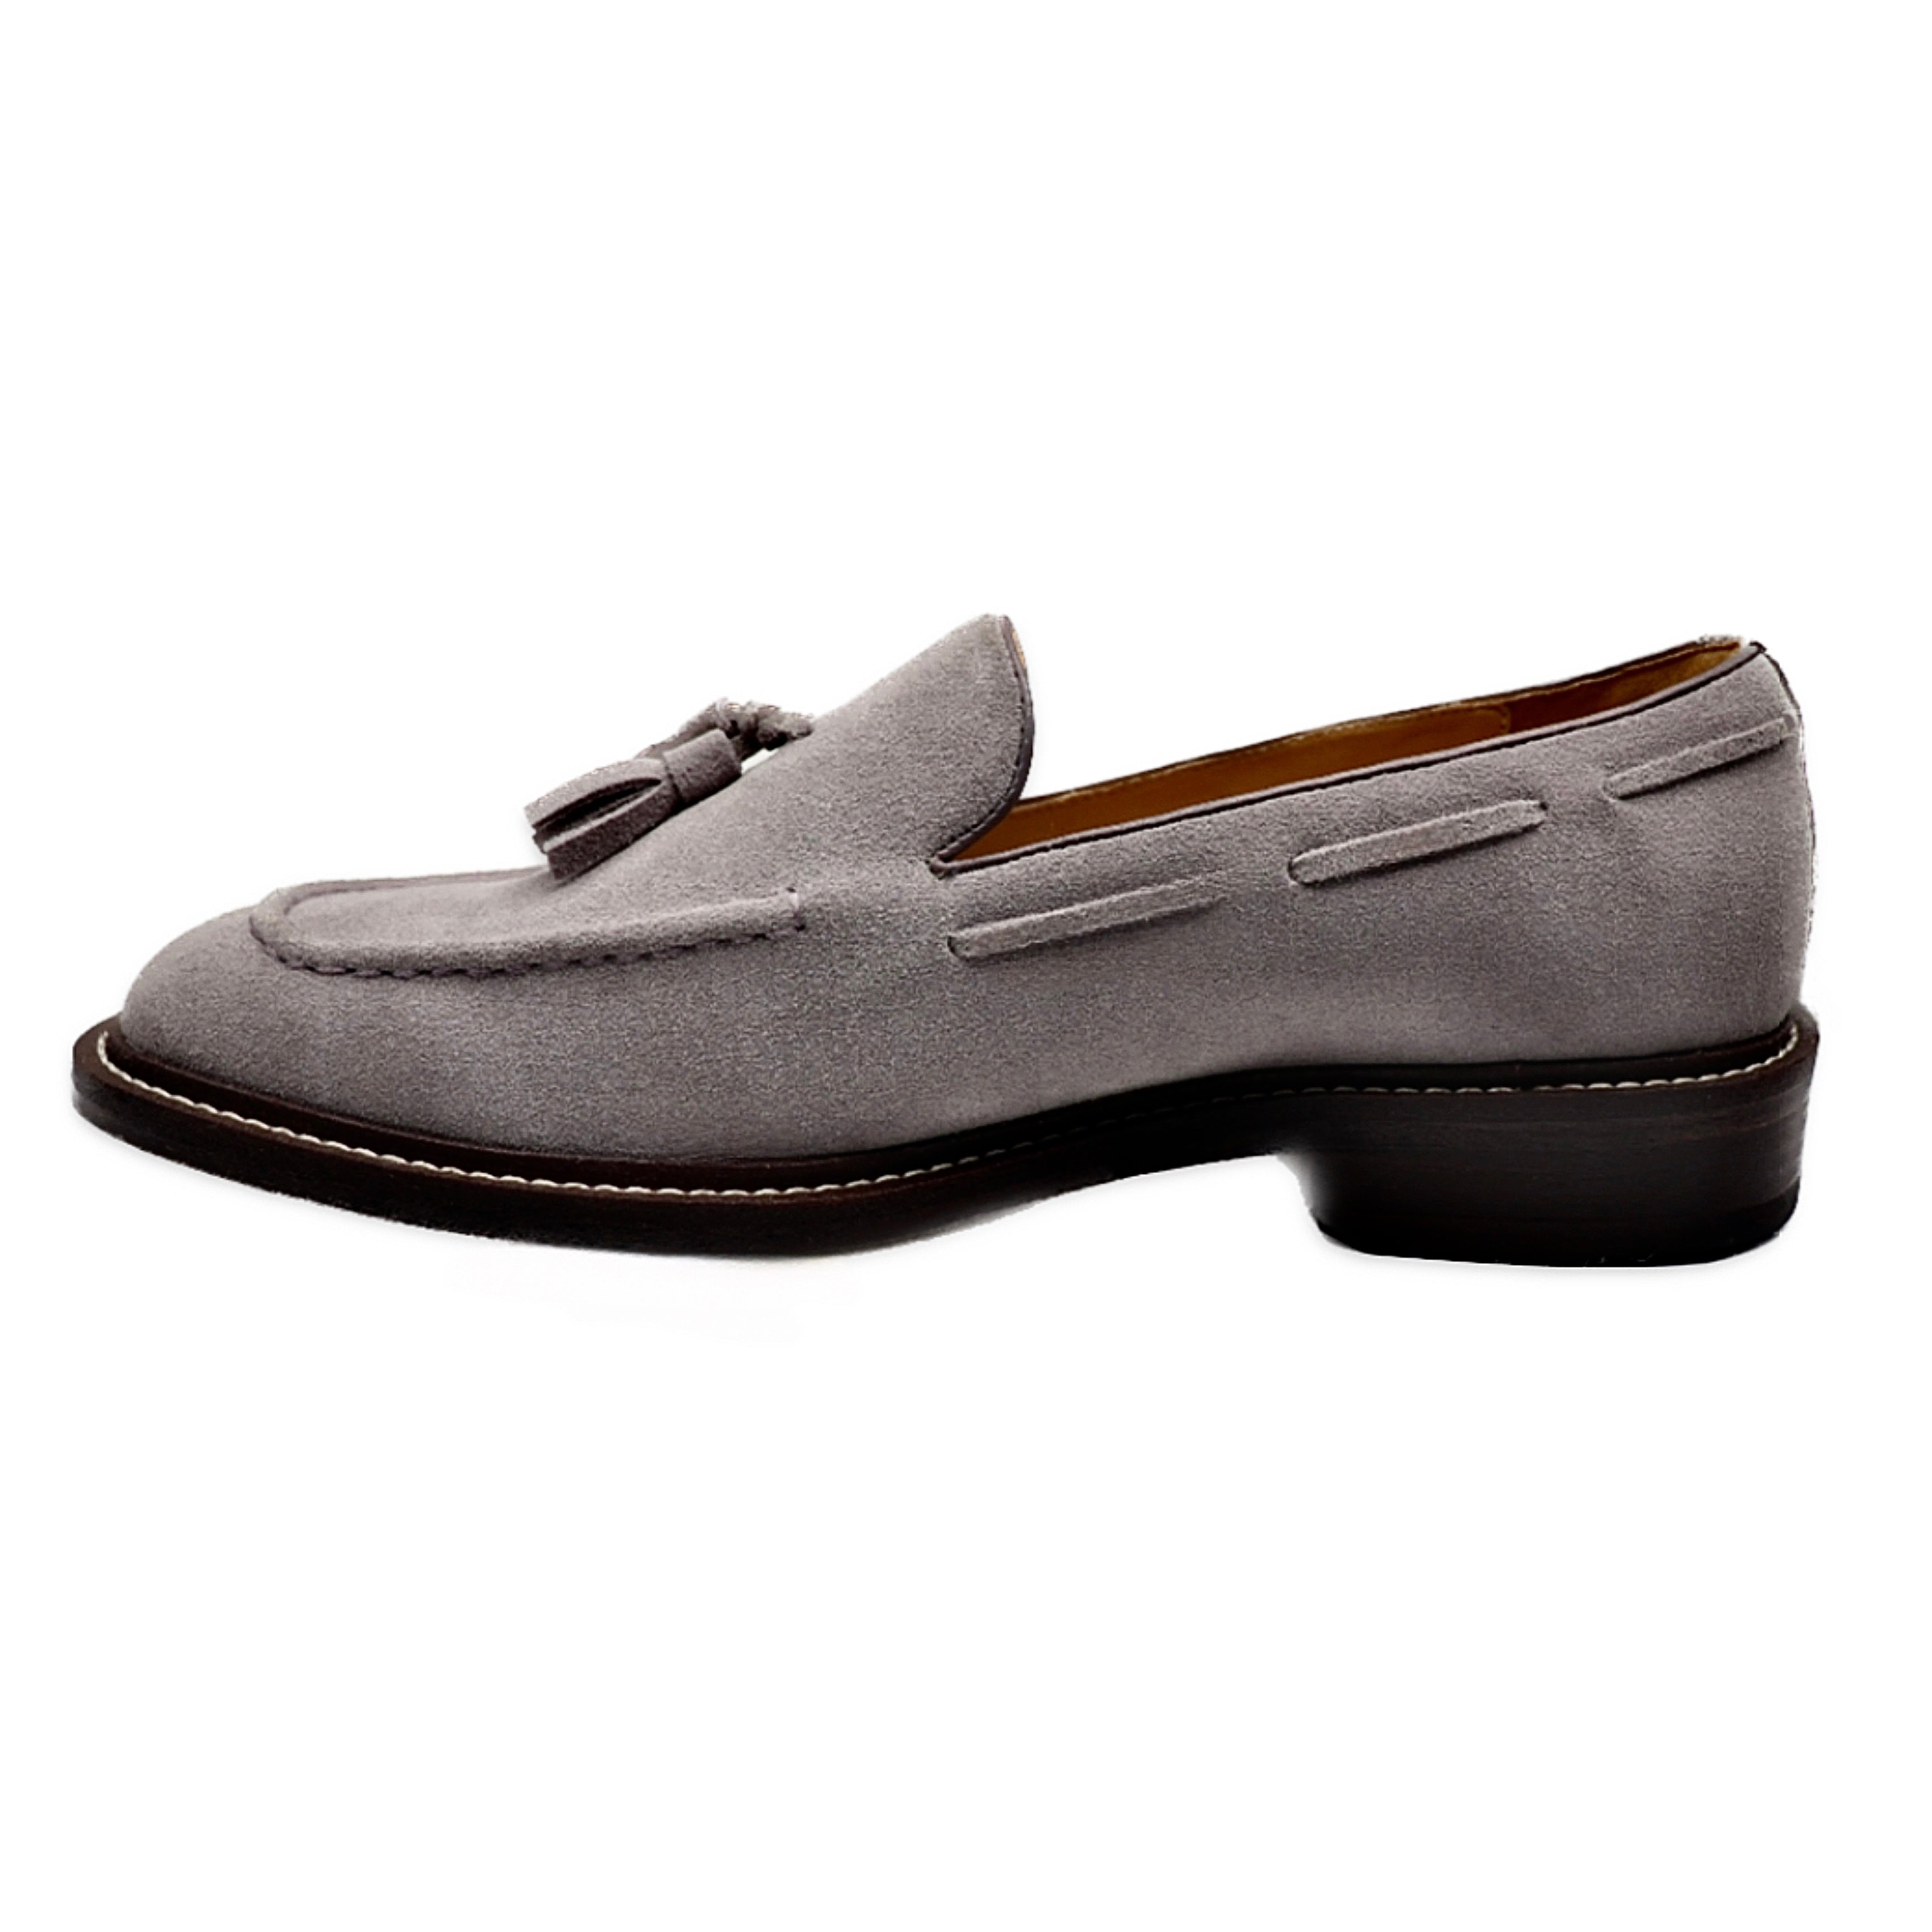 Men's Grey Suede Leather Classic Tassel Loafer Moccasin